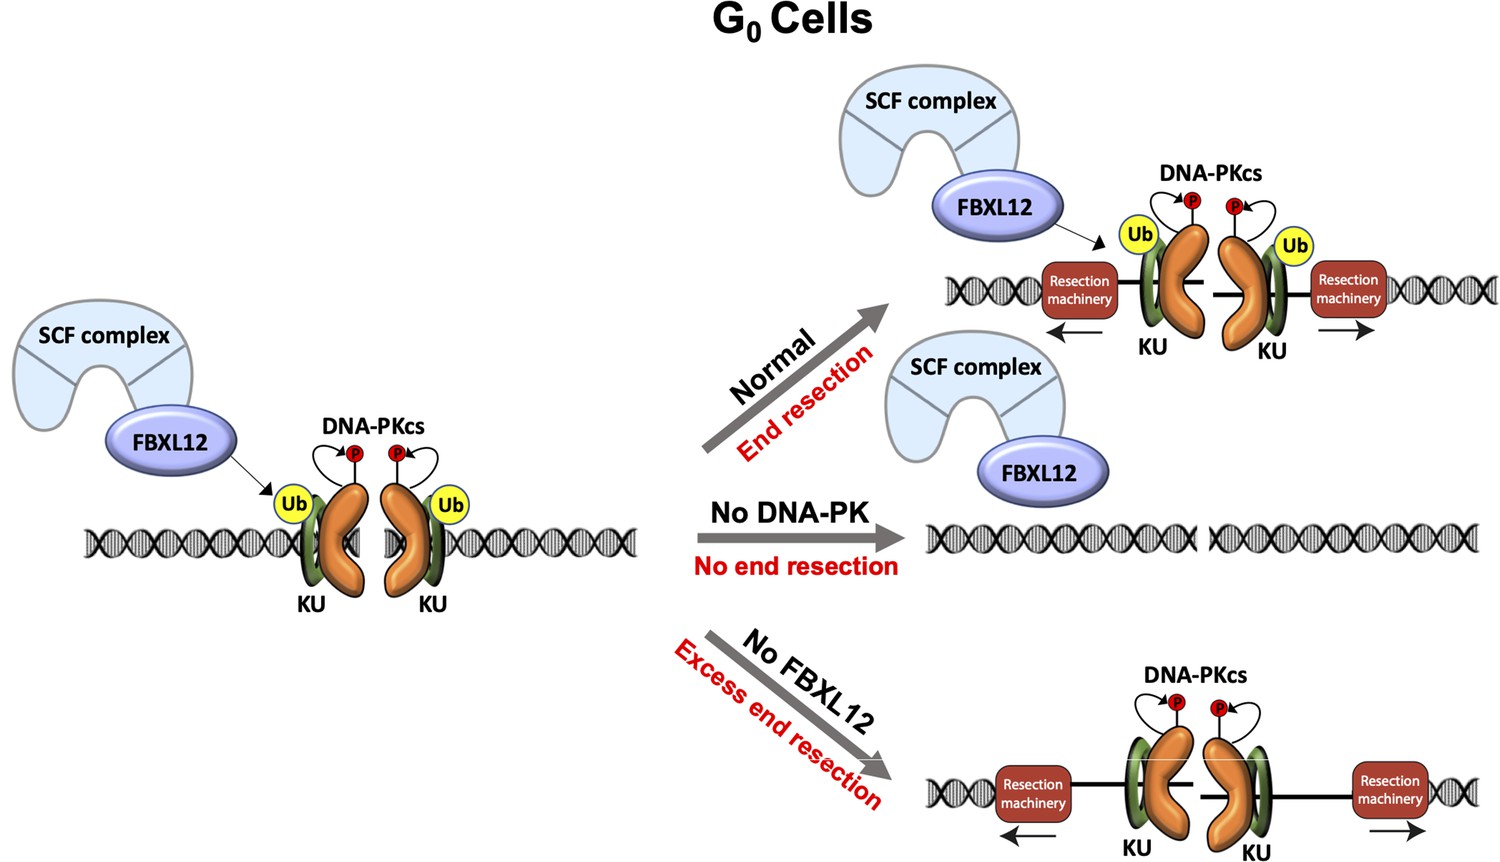 Dna Pk Promotes Dna End Resection At Dna Double Strand Breaks In G0 Cells Elife